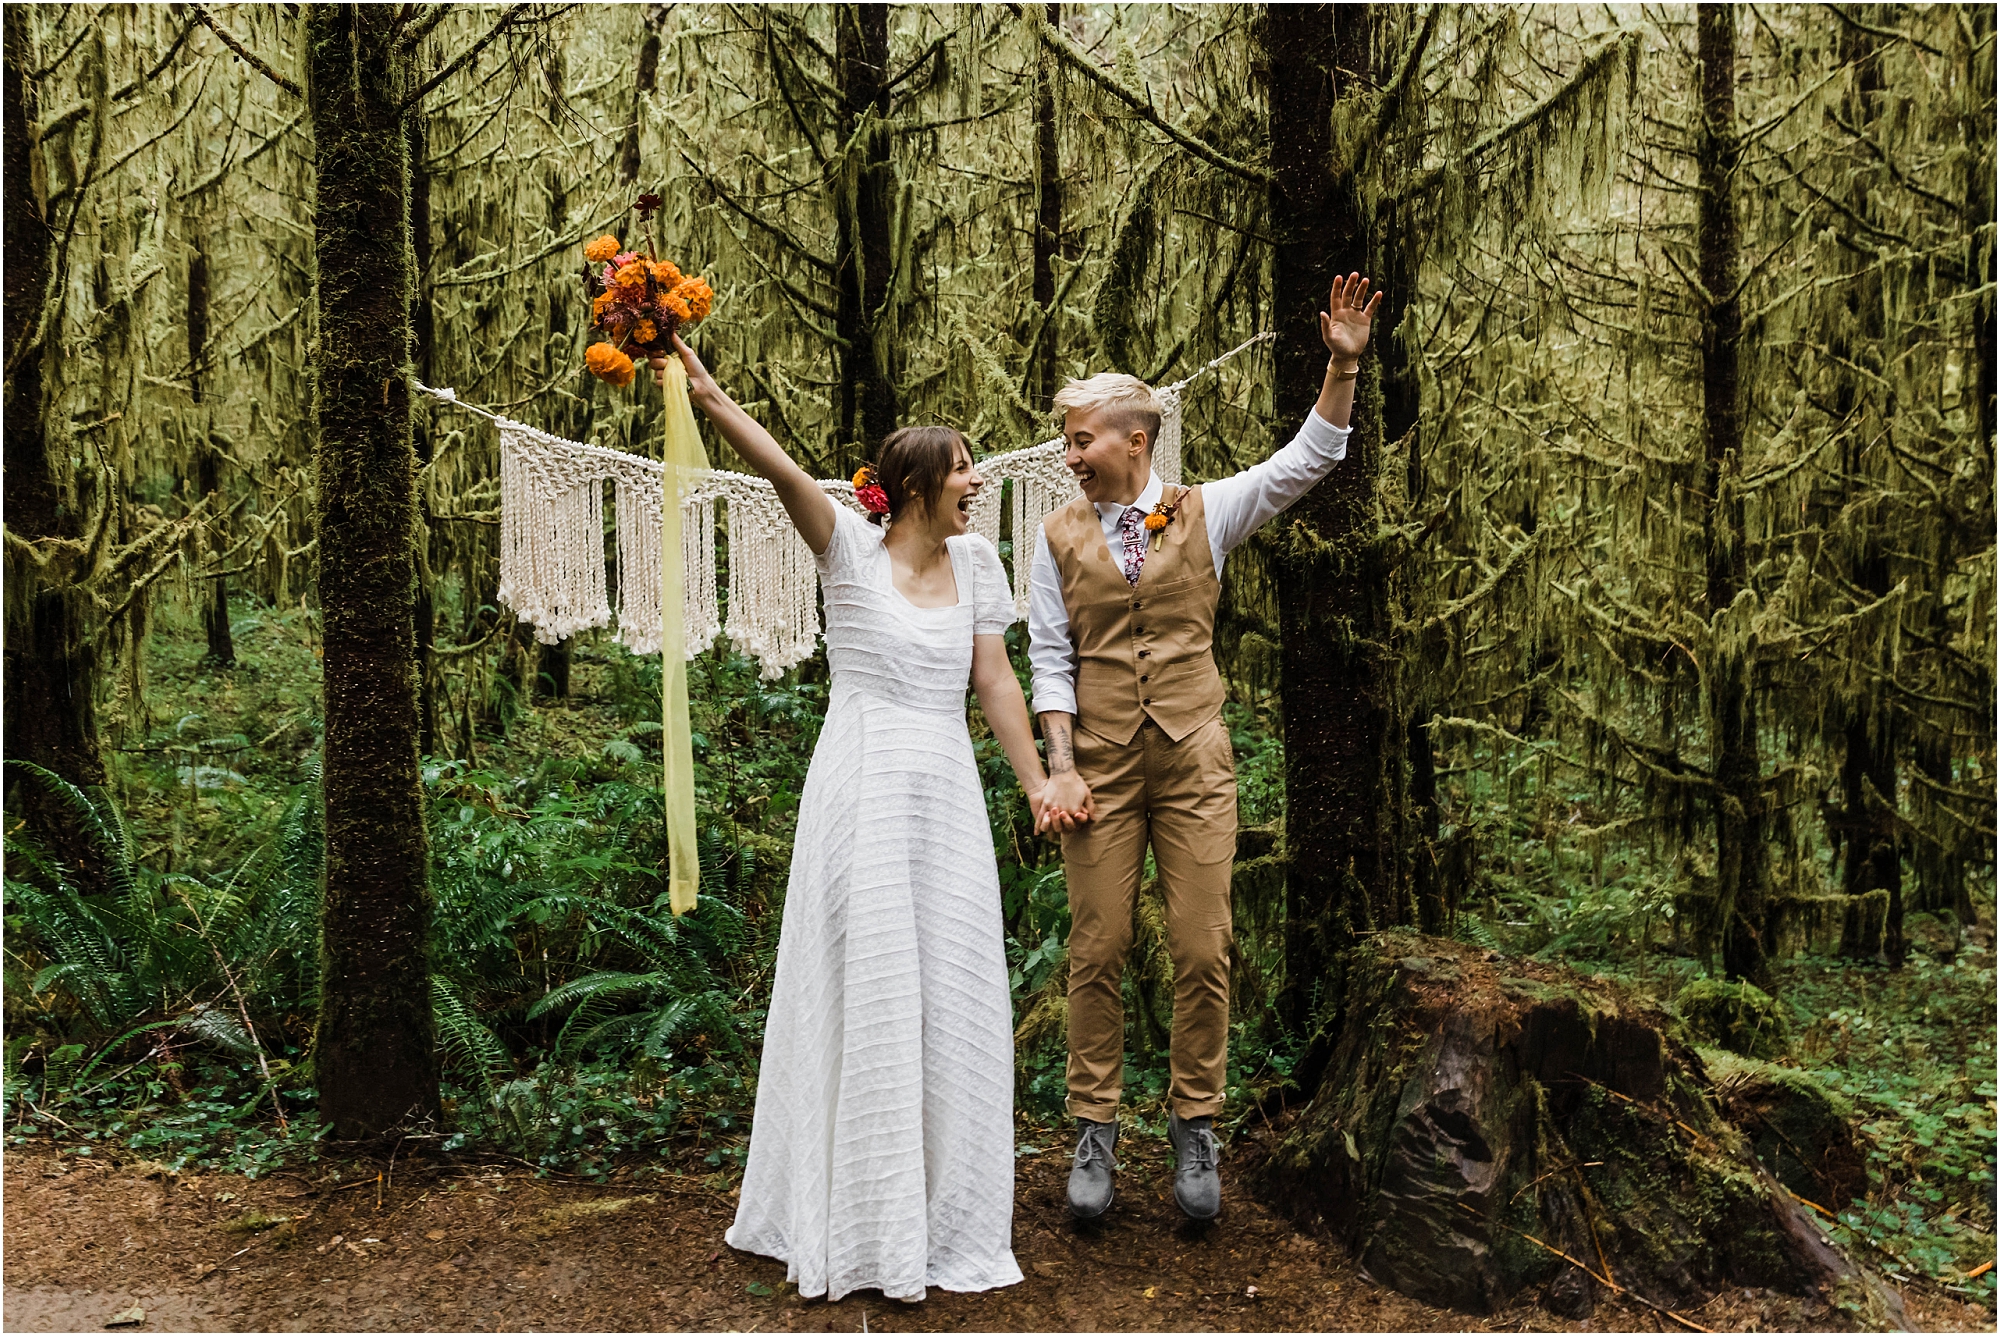 A LGBTQ+ couple celebrates their union by raising their hands in the air and jumping after their gorgeous PNW hiking adventure elopement ceremony in Oregon. | Erica Swantek Photography